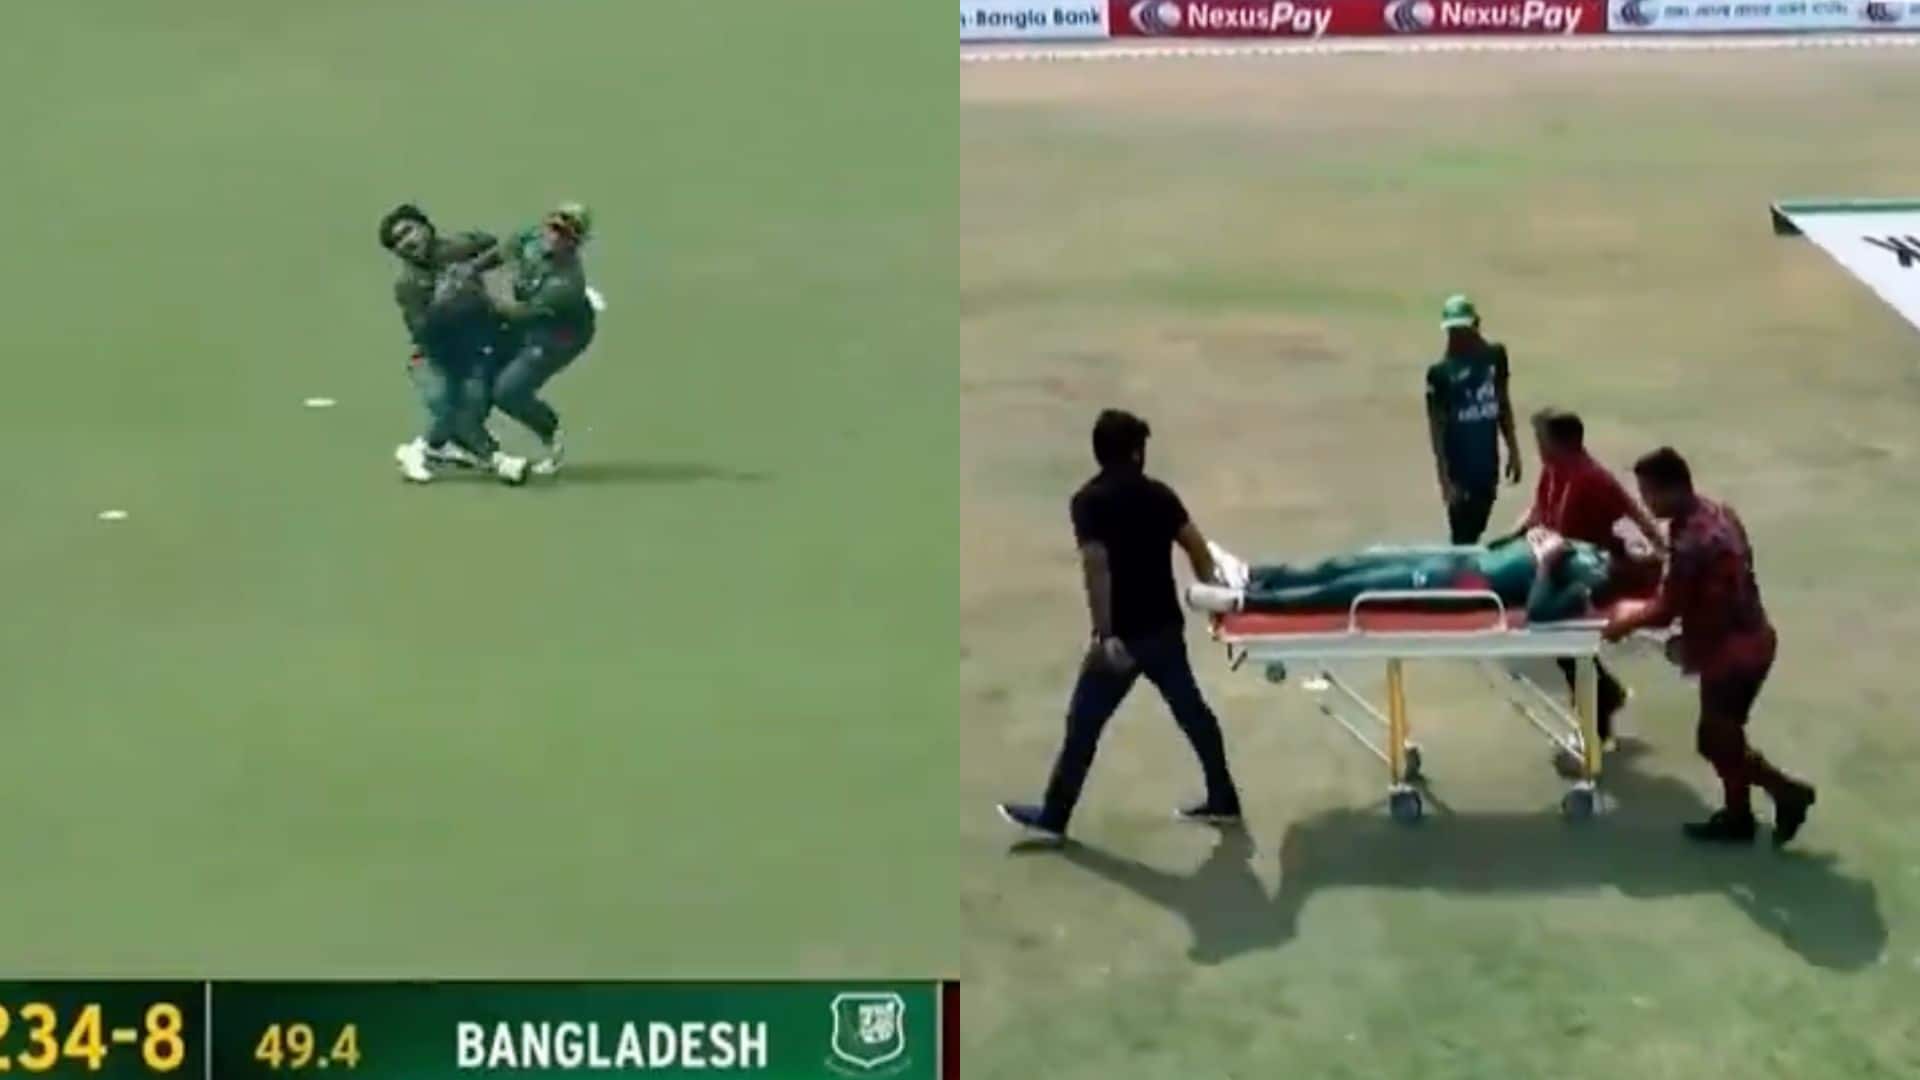 Jaker Ali being carried off the field after the collision [X.com]